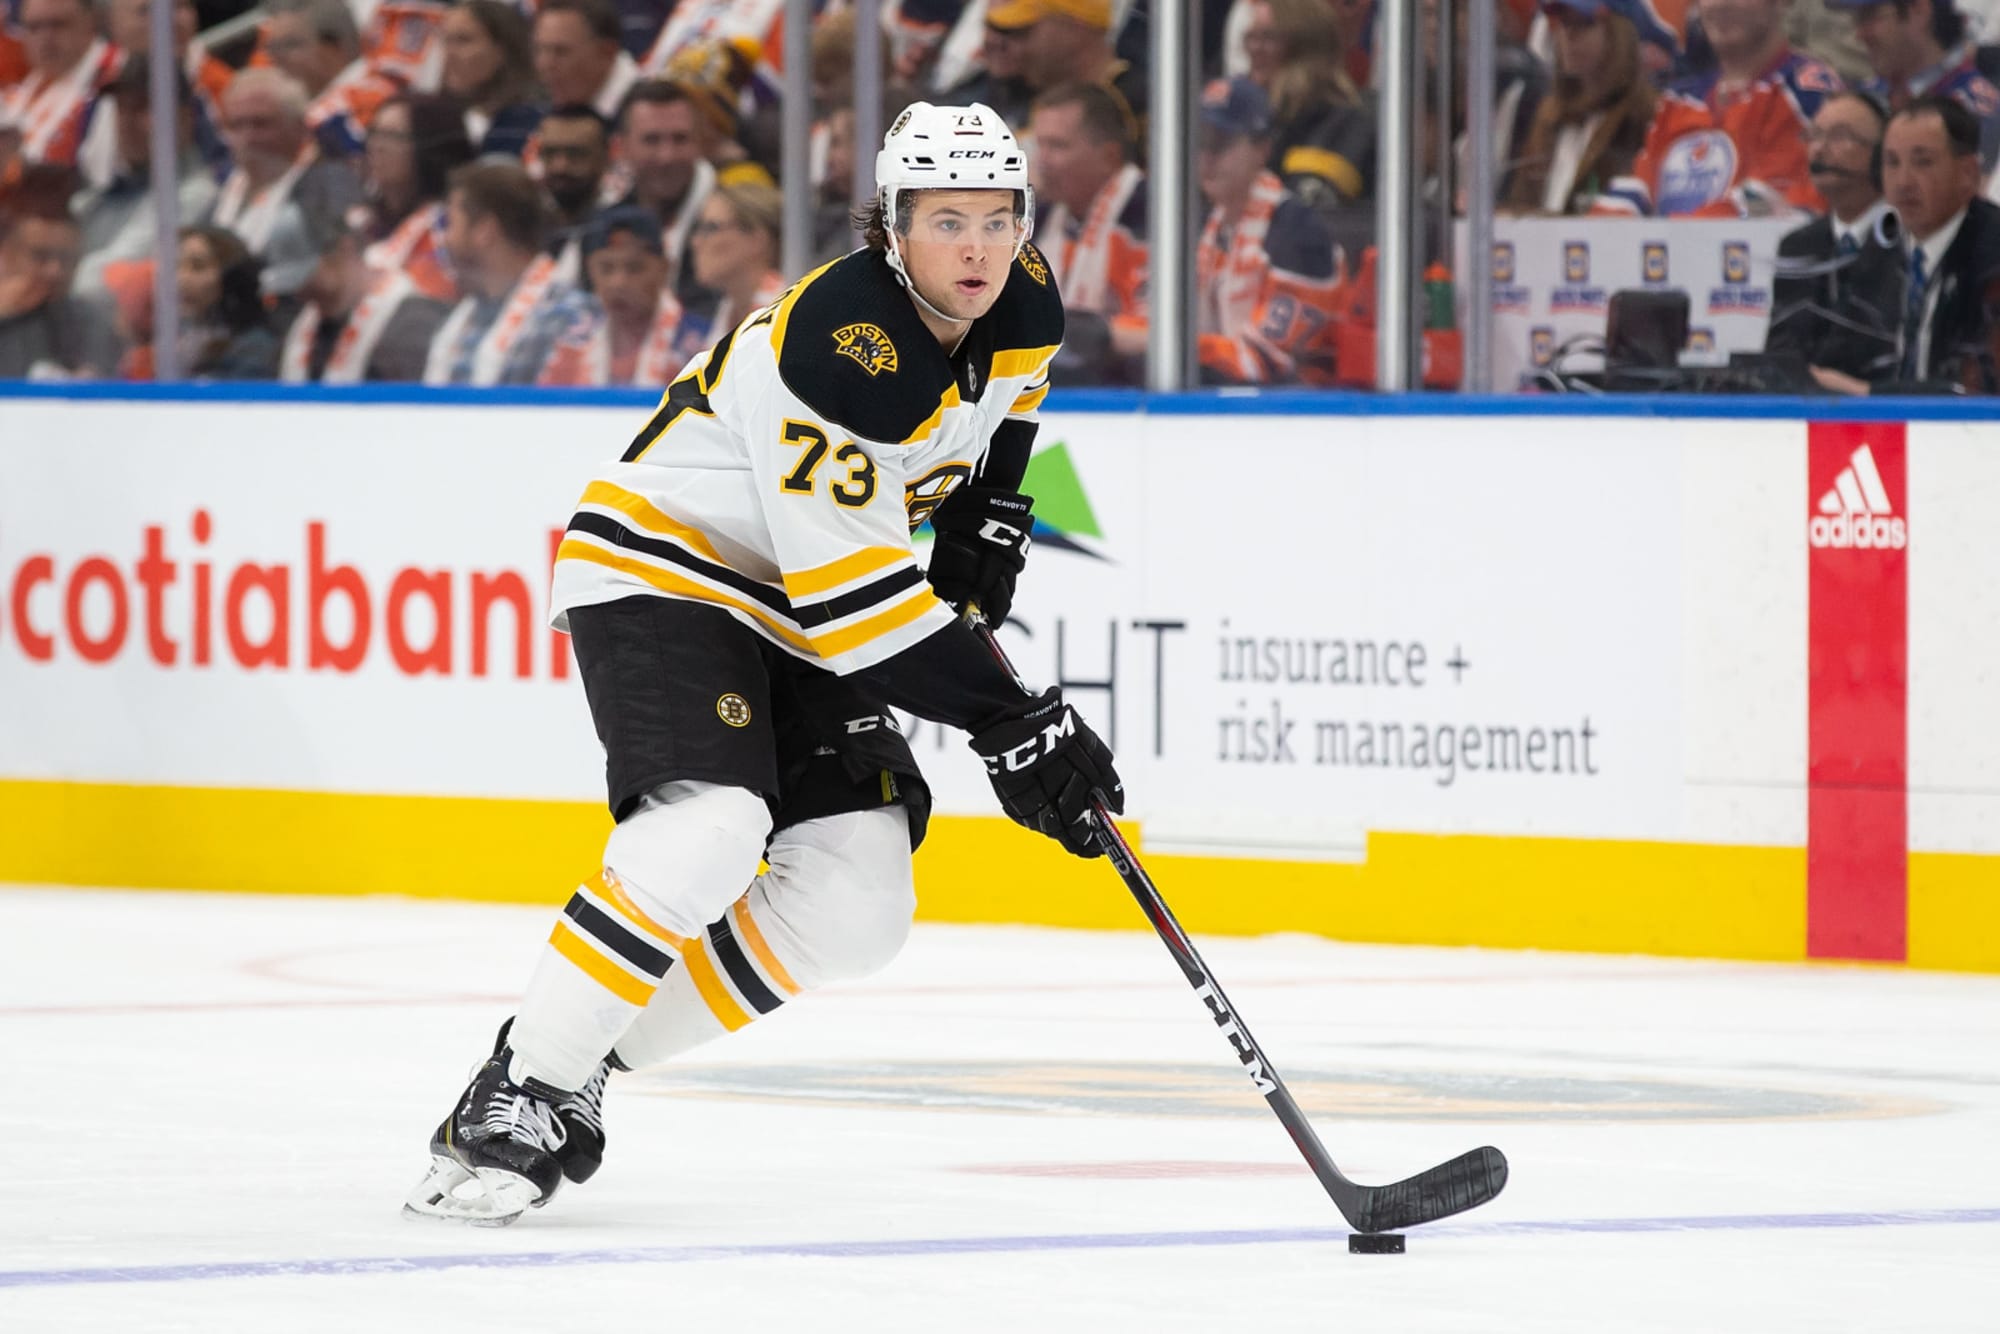 Boston Bruins injury update: Charlie McAvoy out for awhile